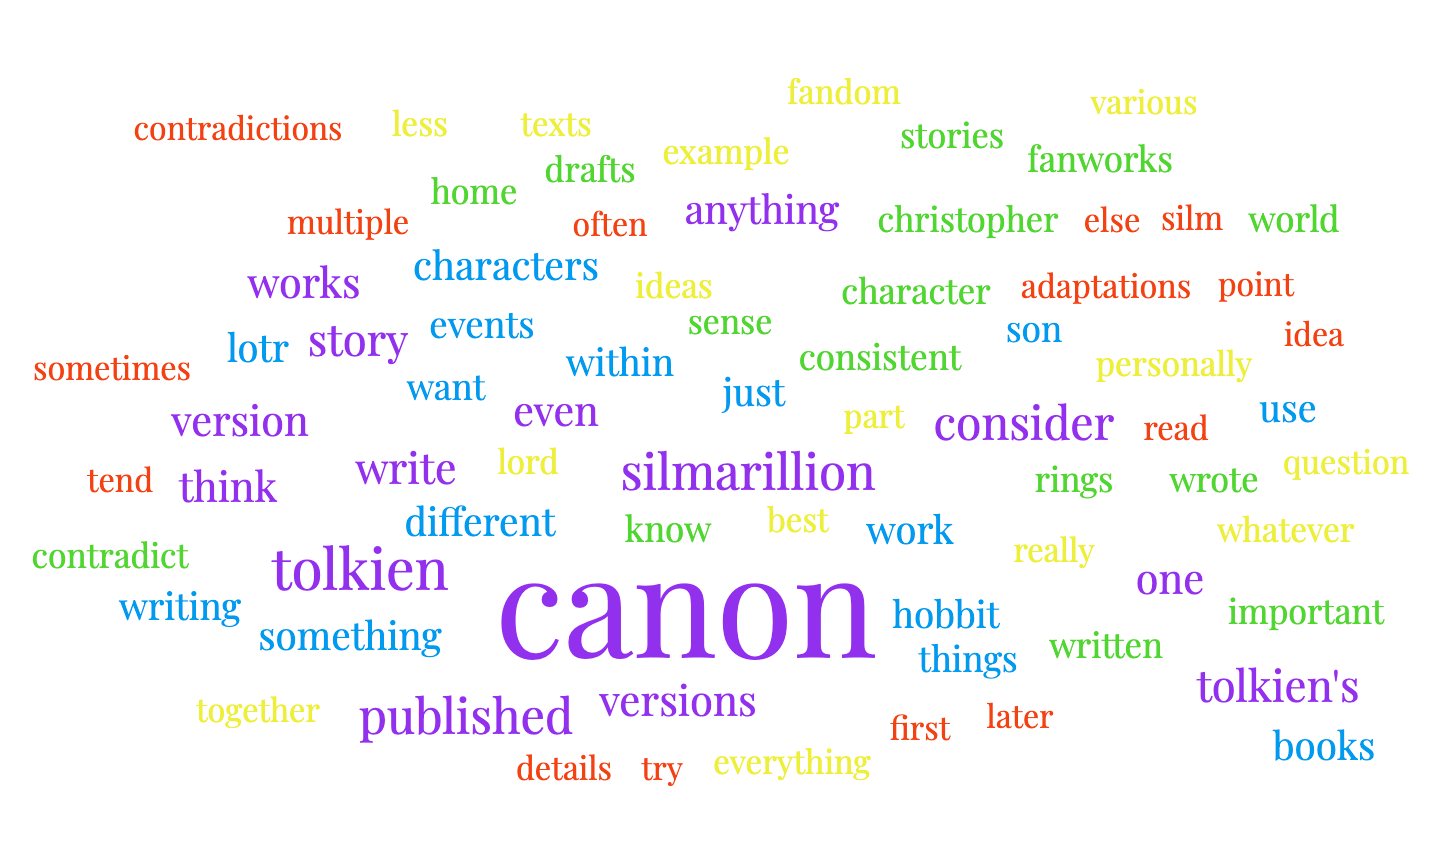 Word cloud showing the seventy-five most frequently used words in the responses. Those words (in order of use) are canon, tolkien, silmarillion, published, consider, story, tolkien's, write, versions, works, one, version, think, even, anything, characters, books, different, something, work, lotr, just, within, writing, use, hobbit, events, things, son, want, fanworks, consistent, know, world, written, character, rings, drafts, wrote, important, stories, home, christopher, contradict, sense, example, lord, whatever, personally, ideas, less, best, everything, texts, fandom, part, various, together, really, question, details, sometimes, multiple, adaptations, first, else, silm, tend, read, contradictions, later, often, point, try, idea